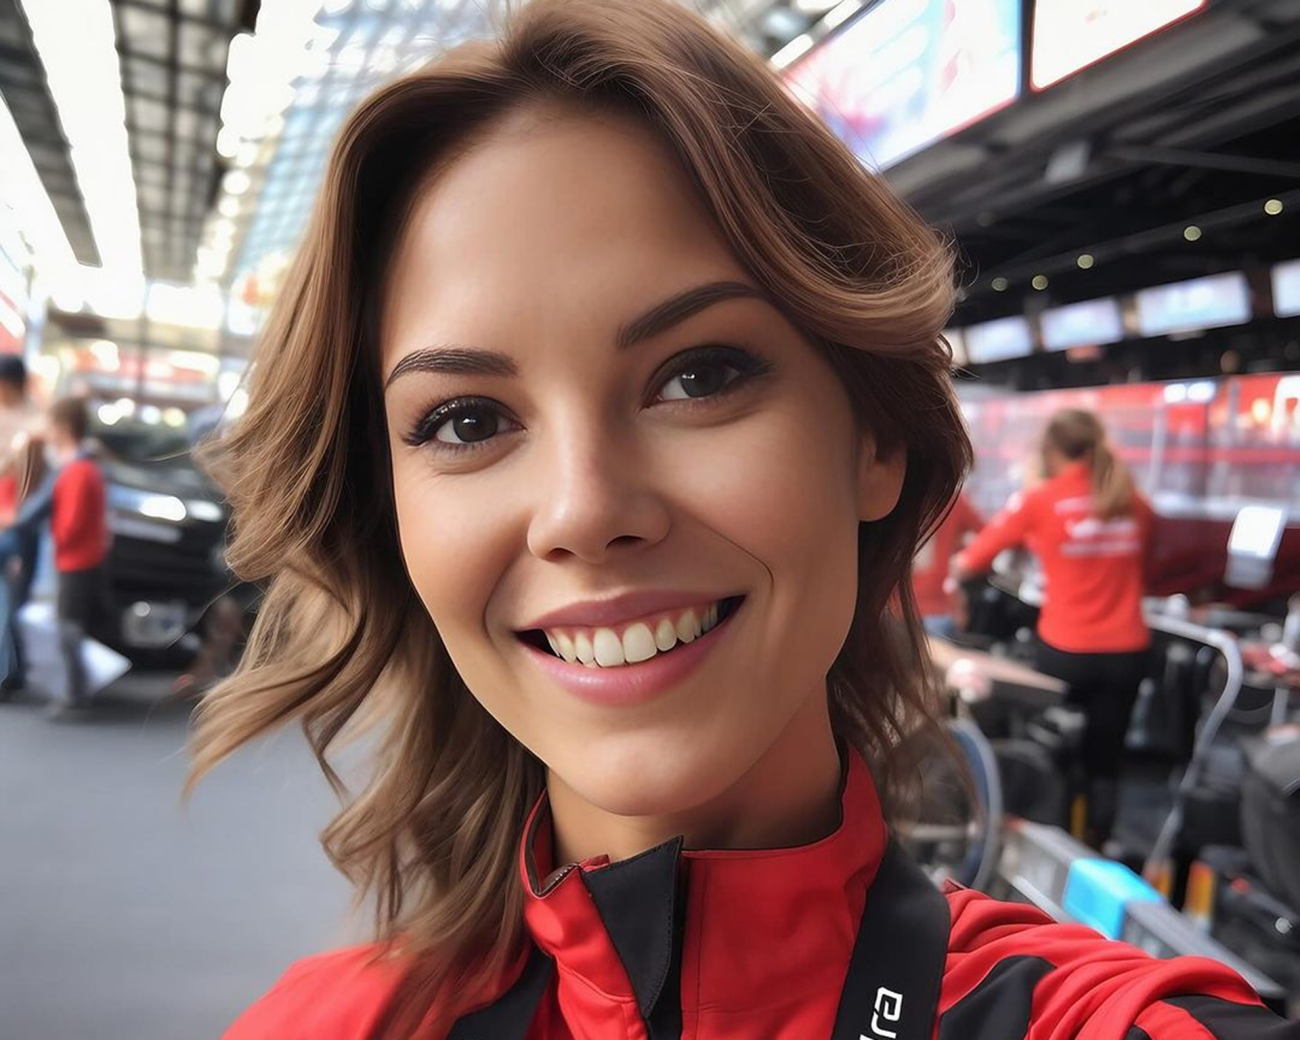 Racing Team Cancels Female AI ‘Ambassador’ Plans Two Days After Launching